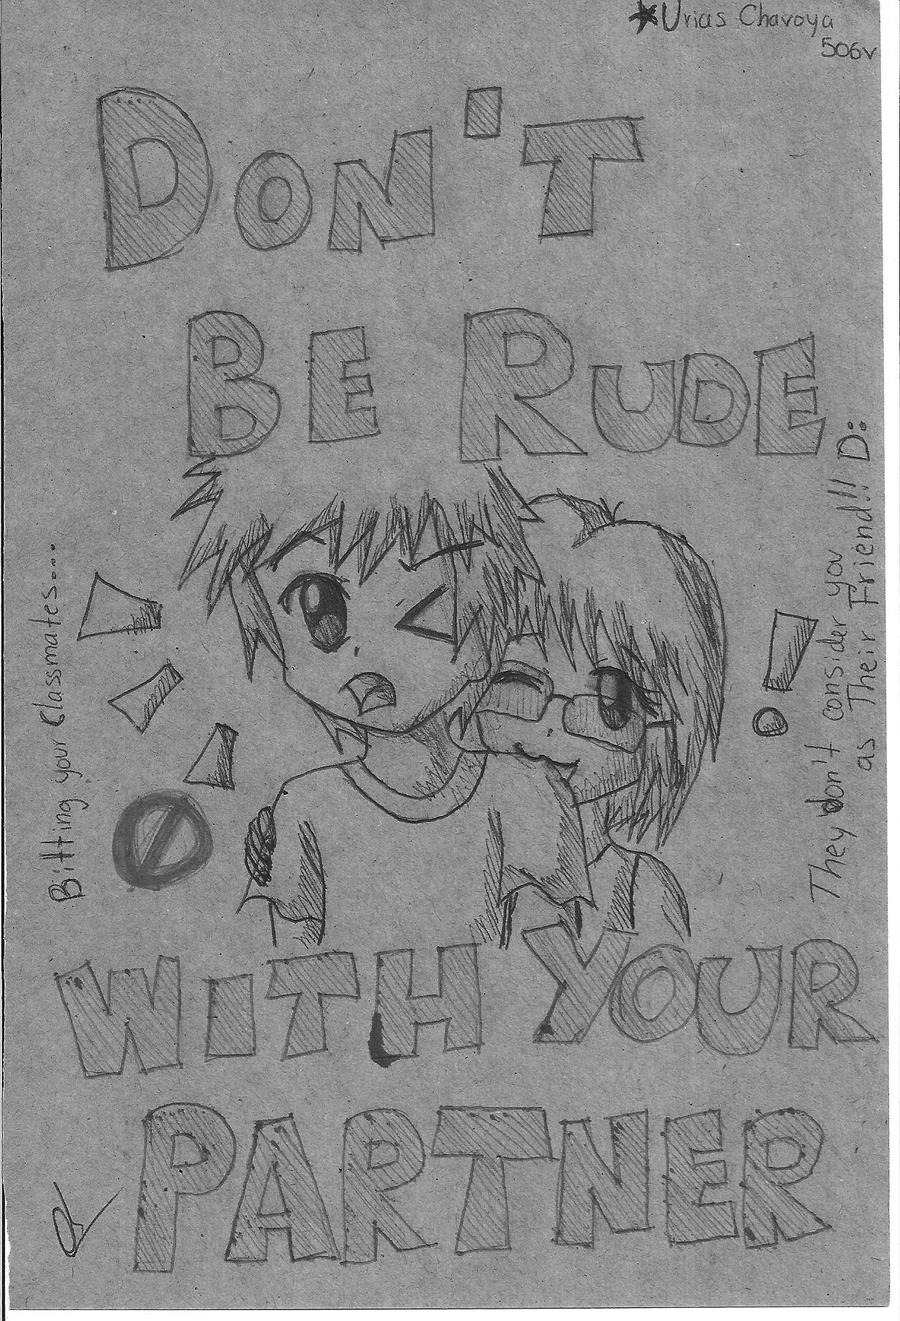  - _school_project__don__t_be_rude_by_marthnely_chan-d4epbe3